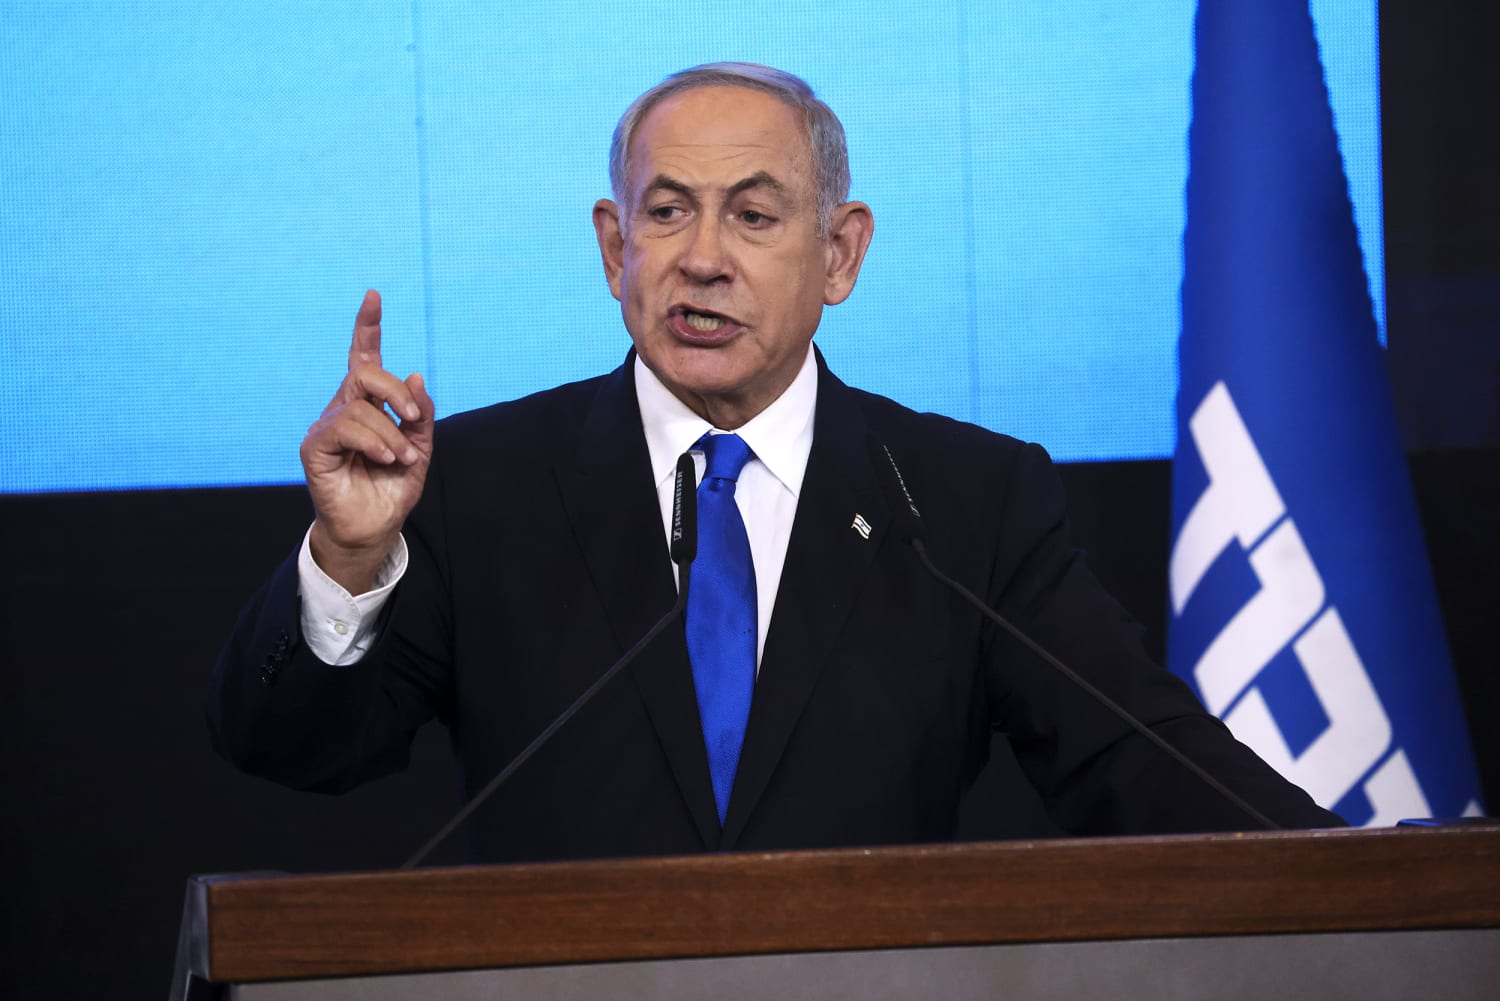 Israel’s Netanyahu says he has formed new government